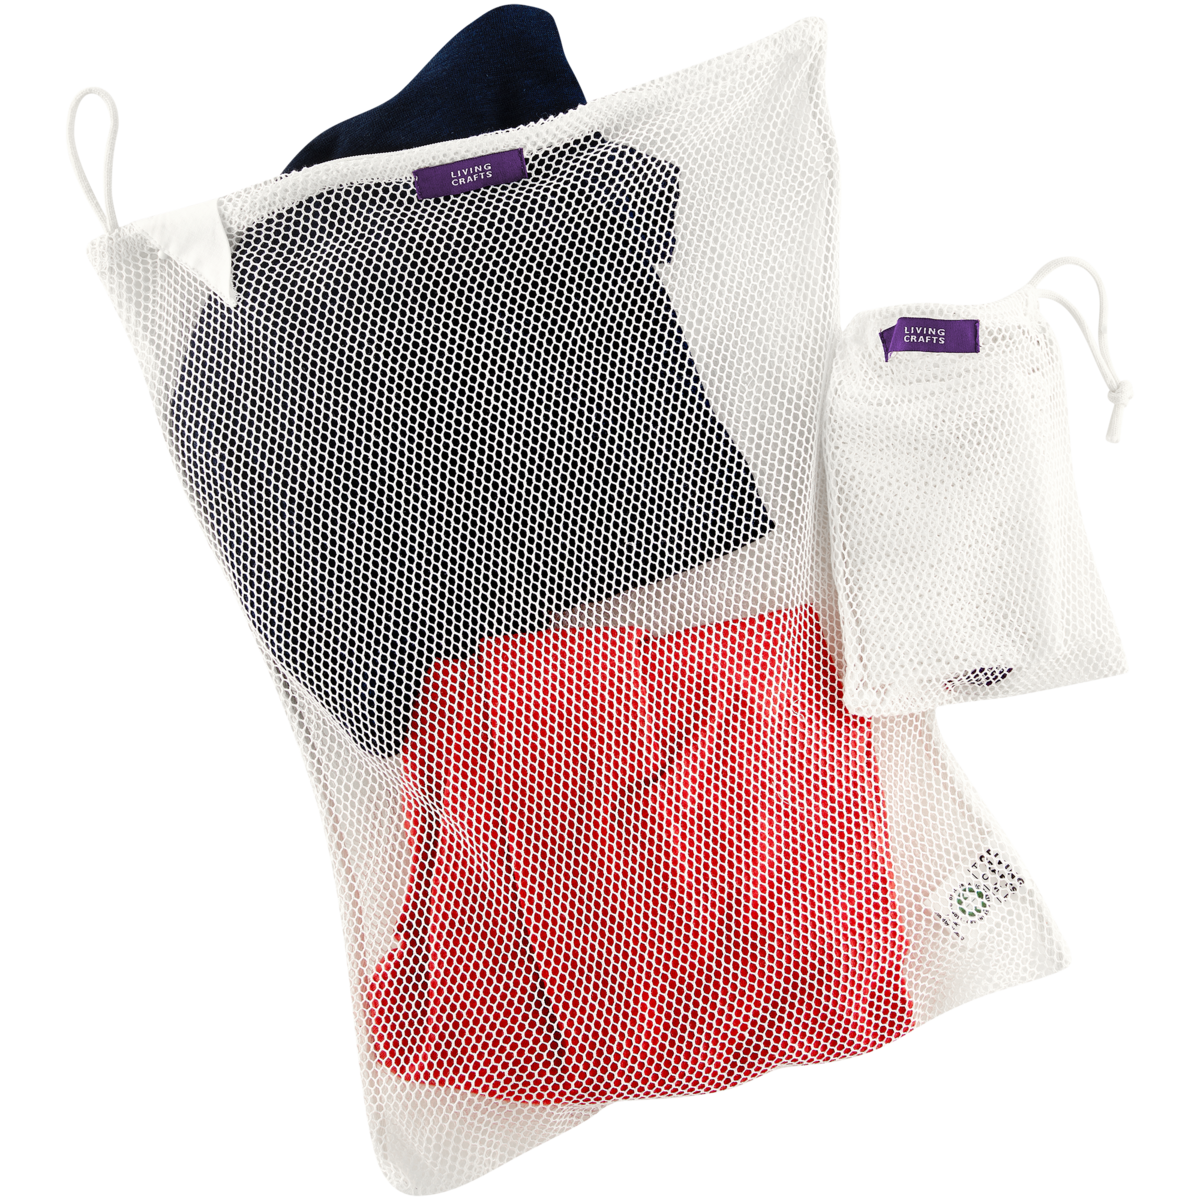 White Home Laundry bags, set